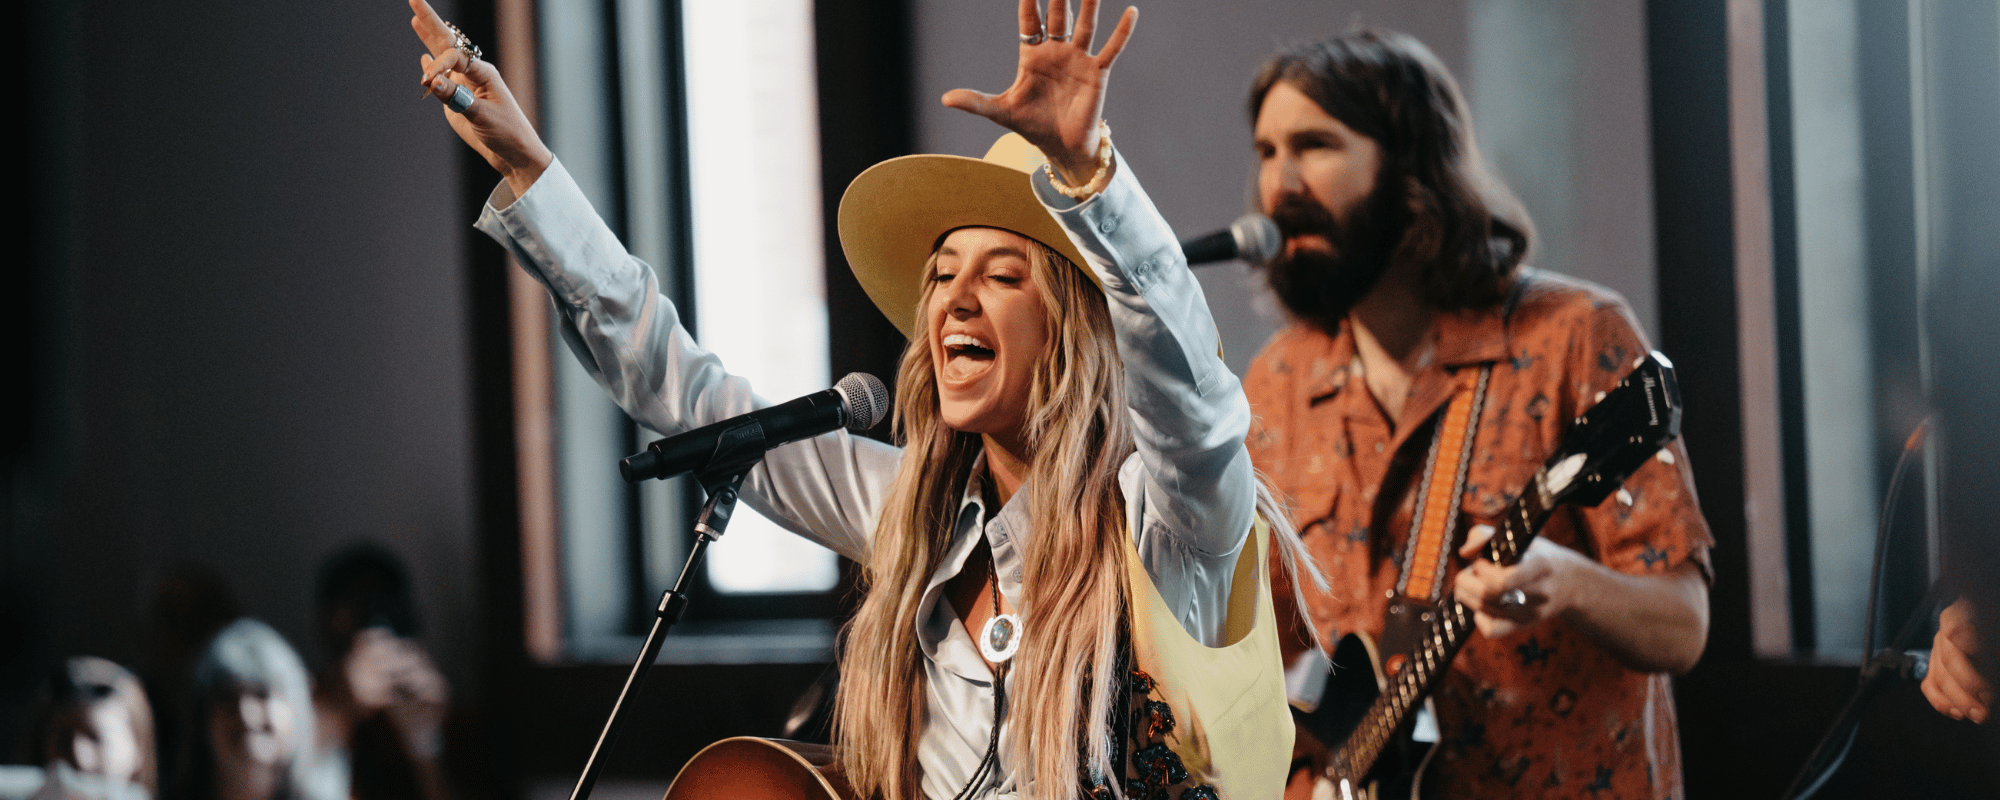 Lainey Wilson Builds Up Emerging Artists with Bell Bottom Barn Dance at CMA Fest